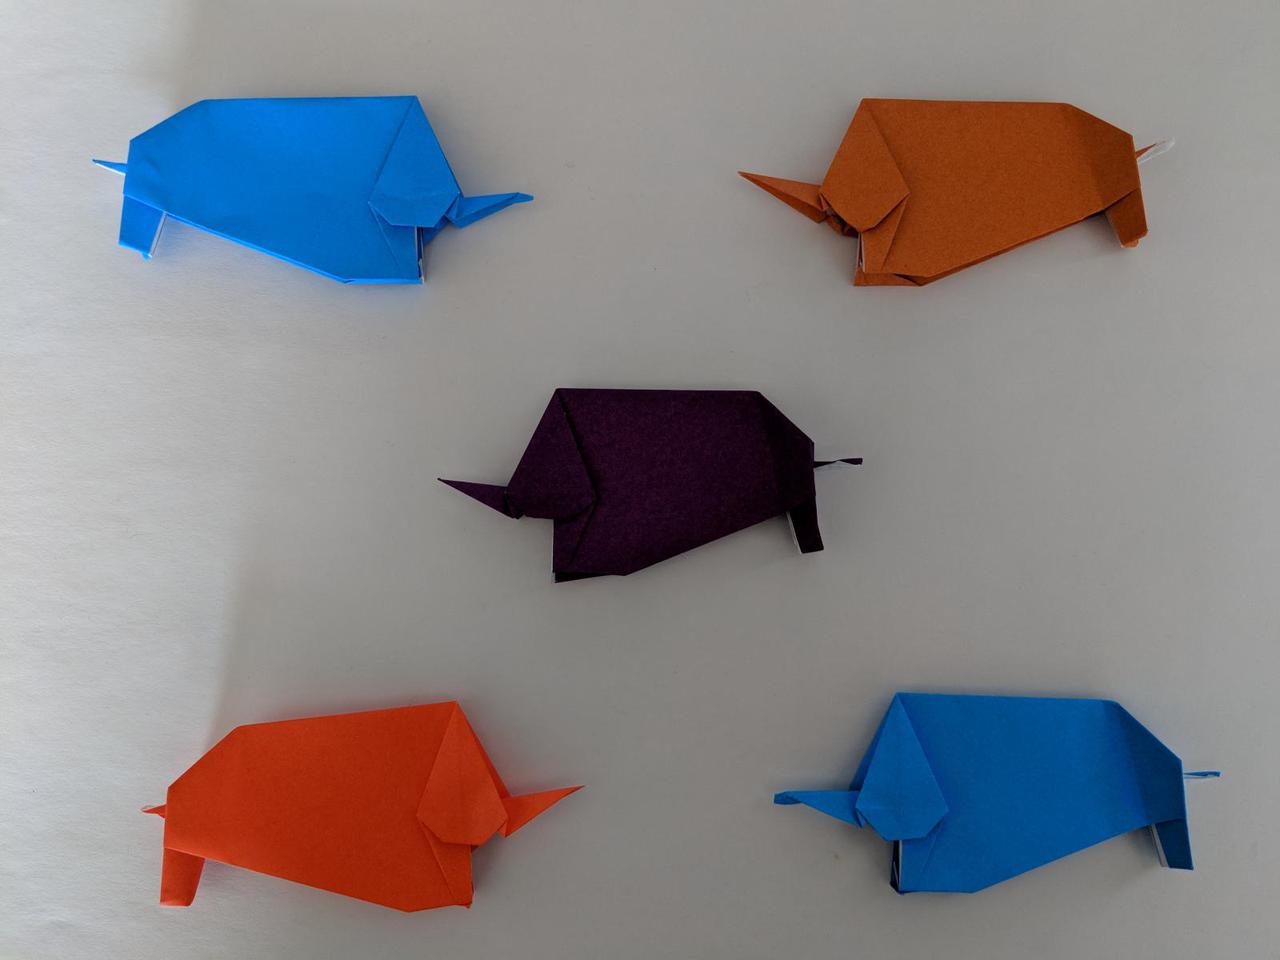 five origami elephants, each with a long trunk and fat body.